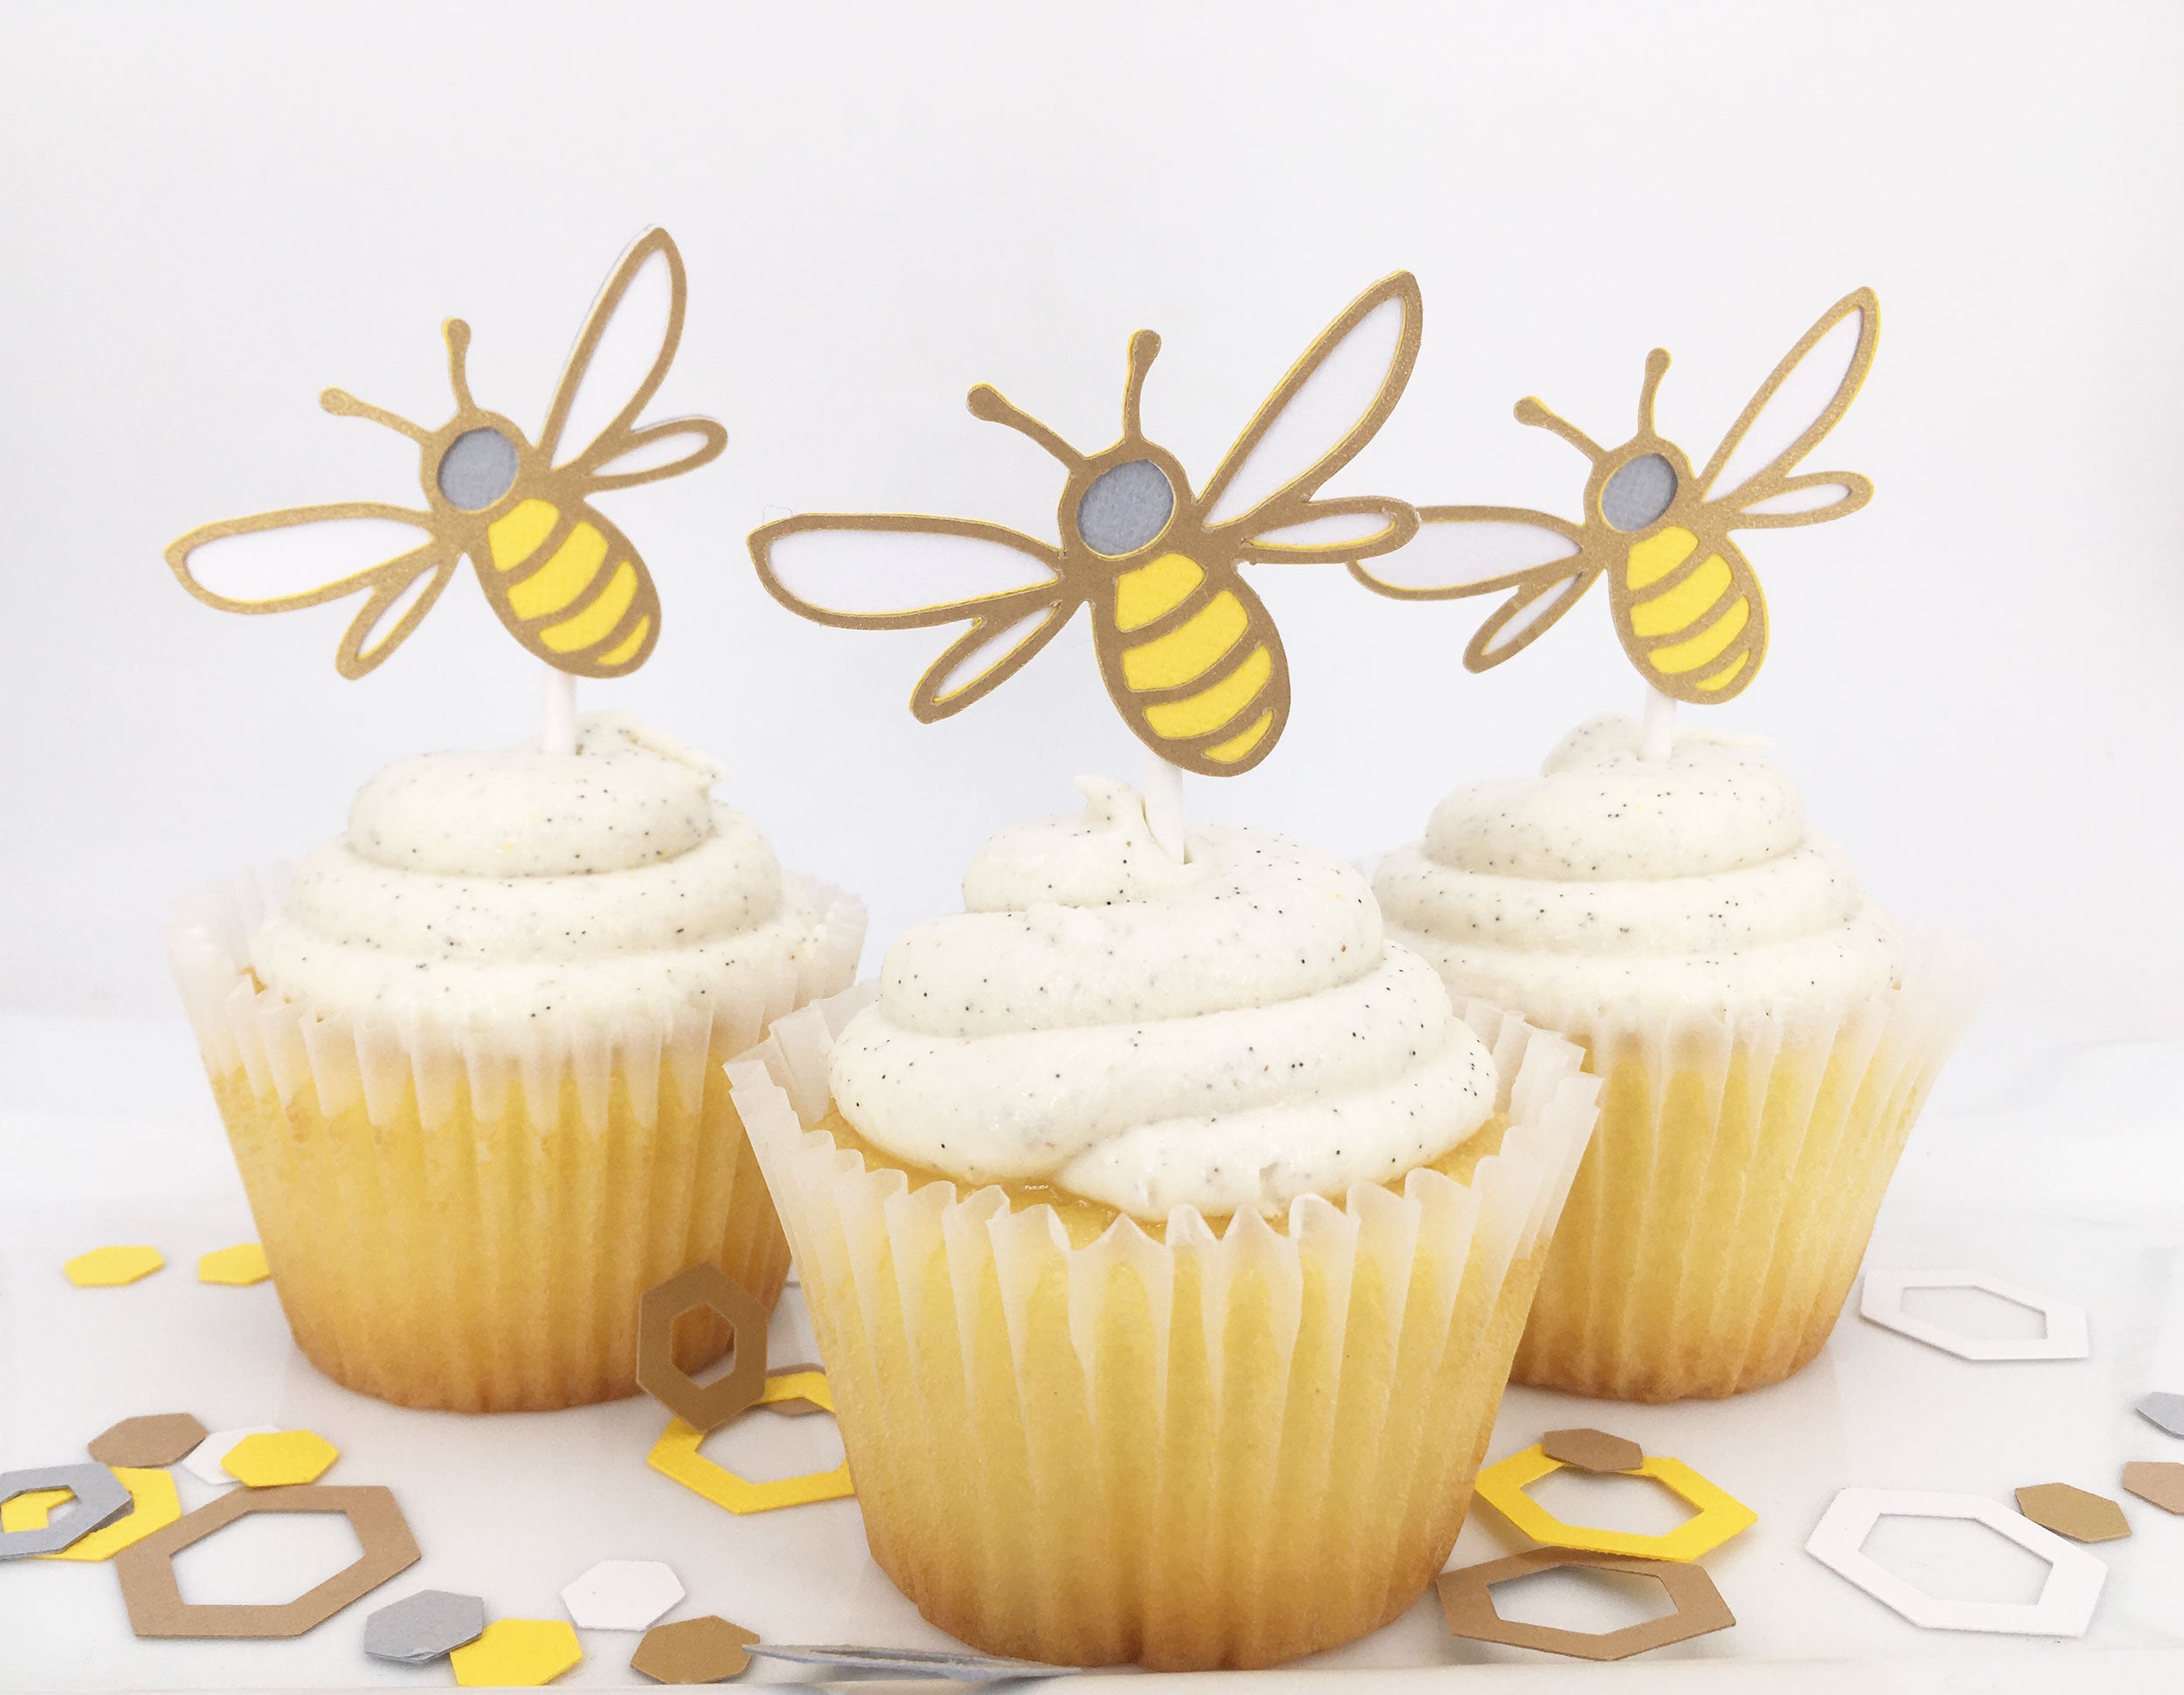 OUNONA 24 Pcs Paper Cake Toppers Shiny Bee Cupcake Toppers Honeybee Fruit  Picks Dessert Decorative Supplies for Kid Birthday Party 